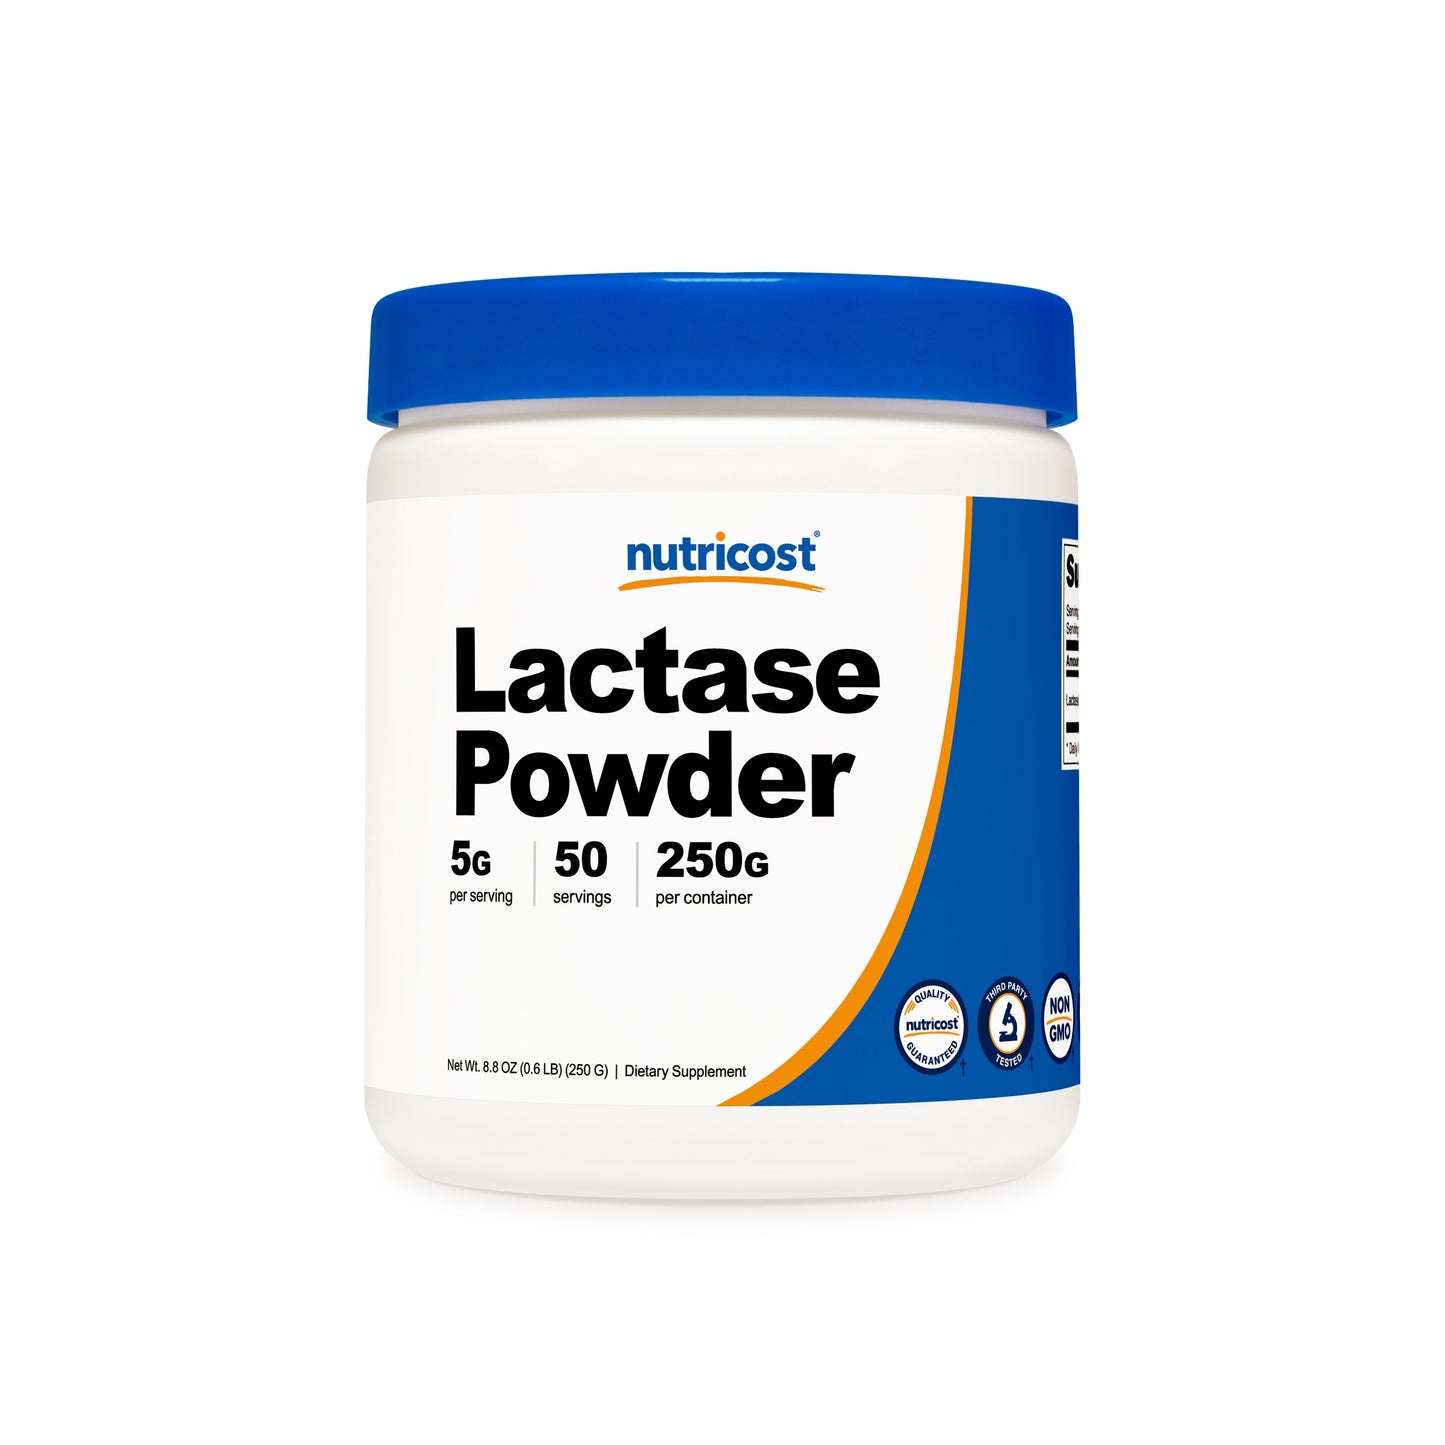 Nutricost Lactase Powder